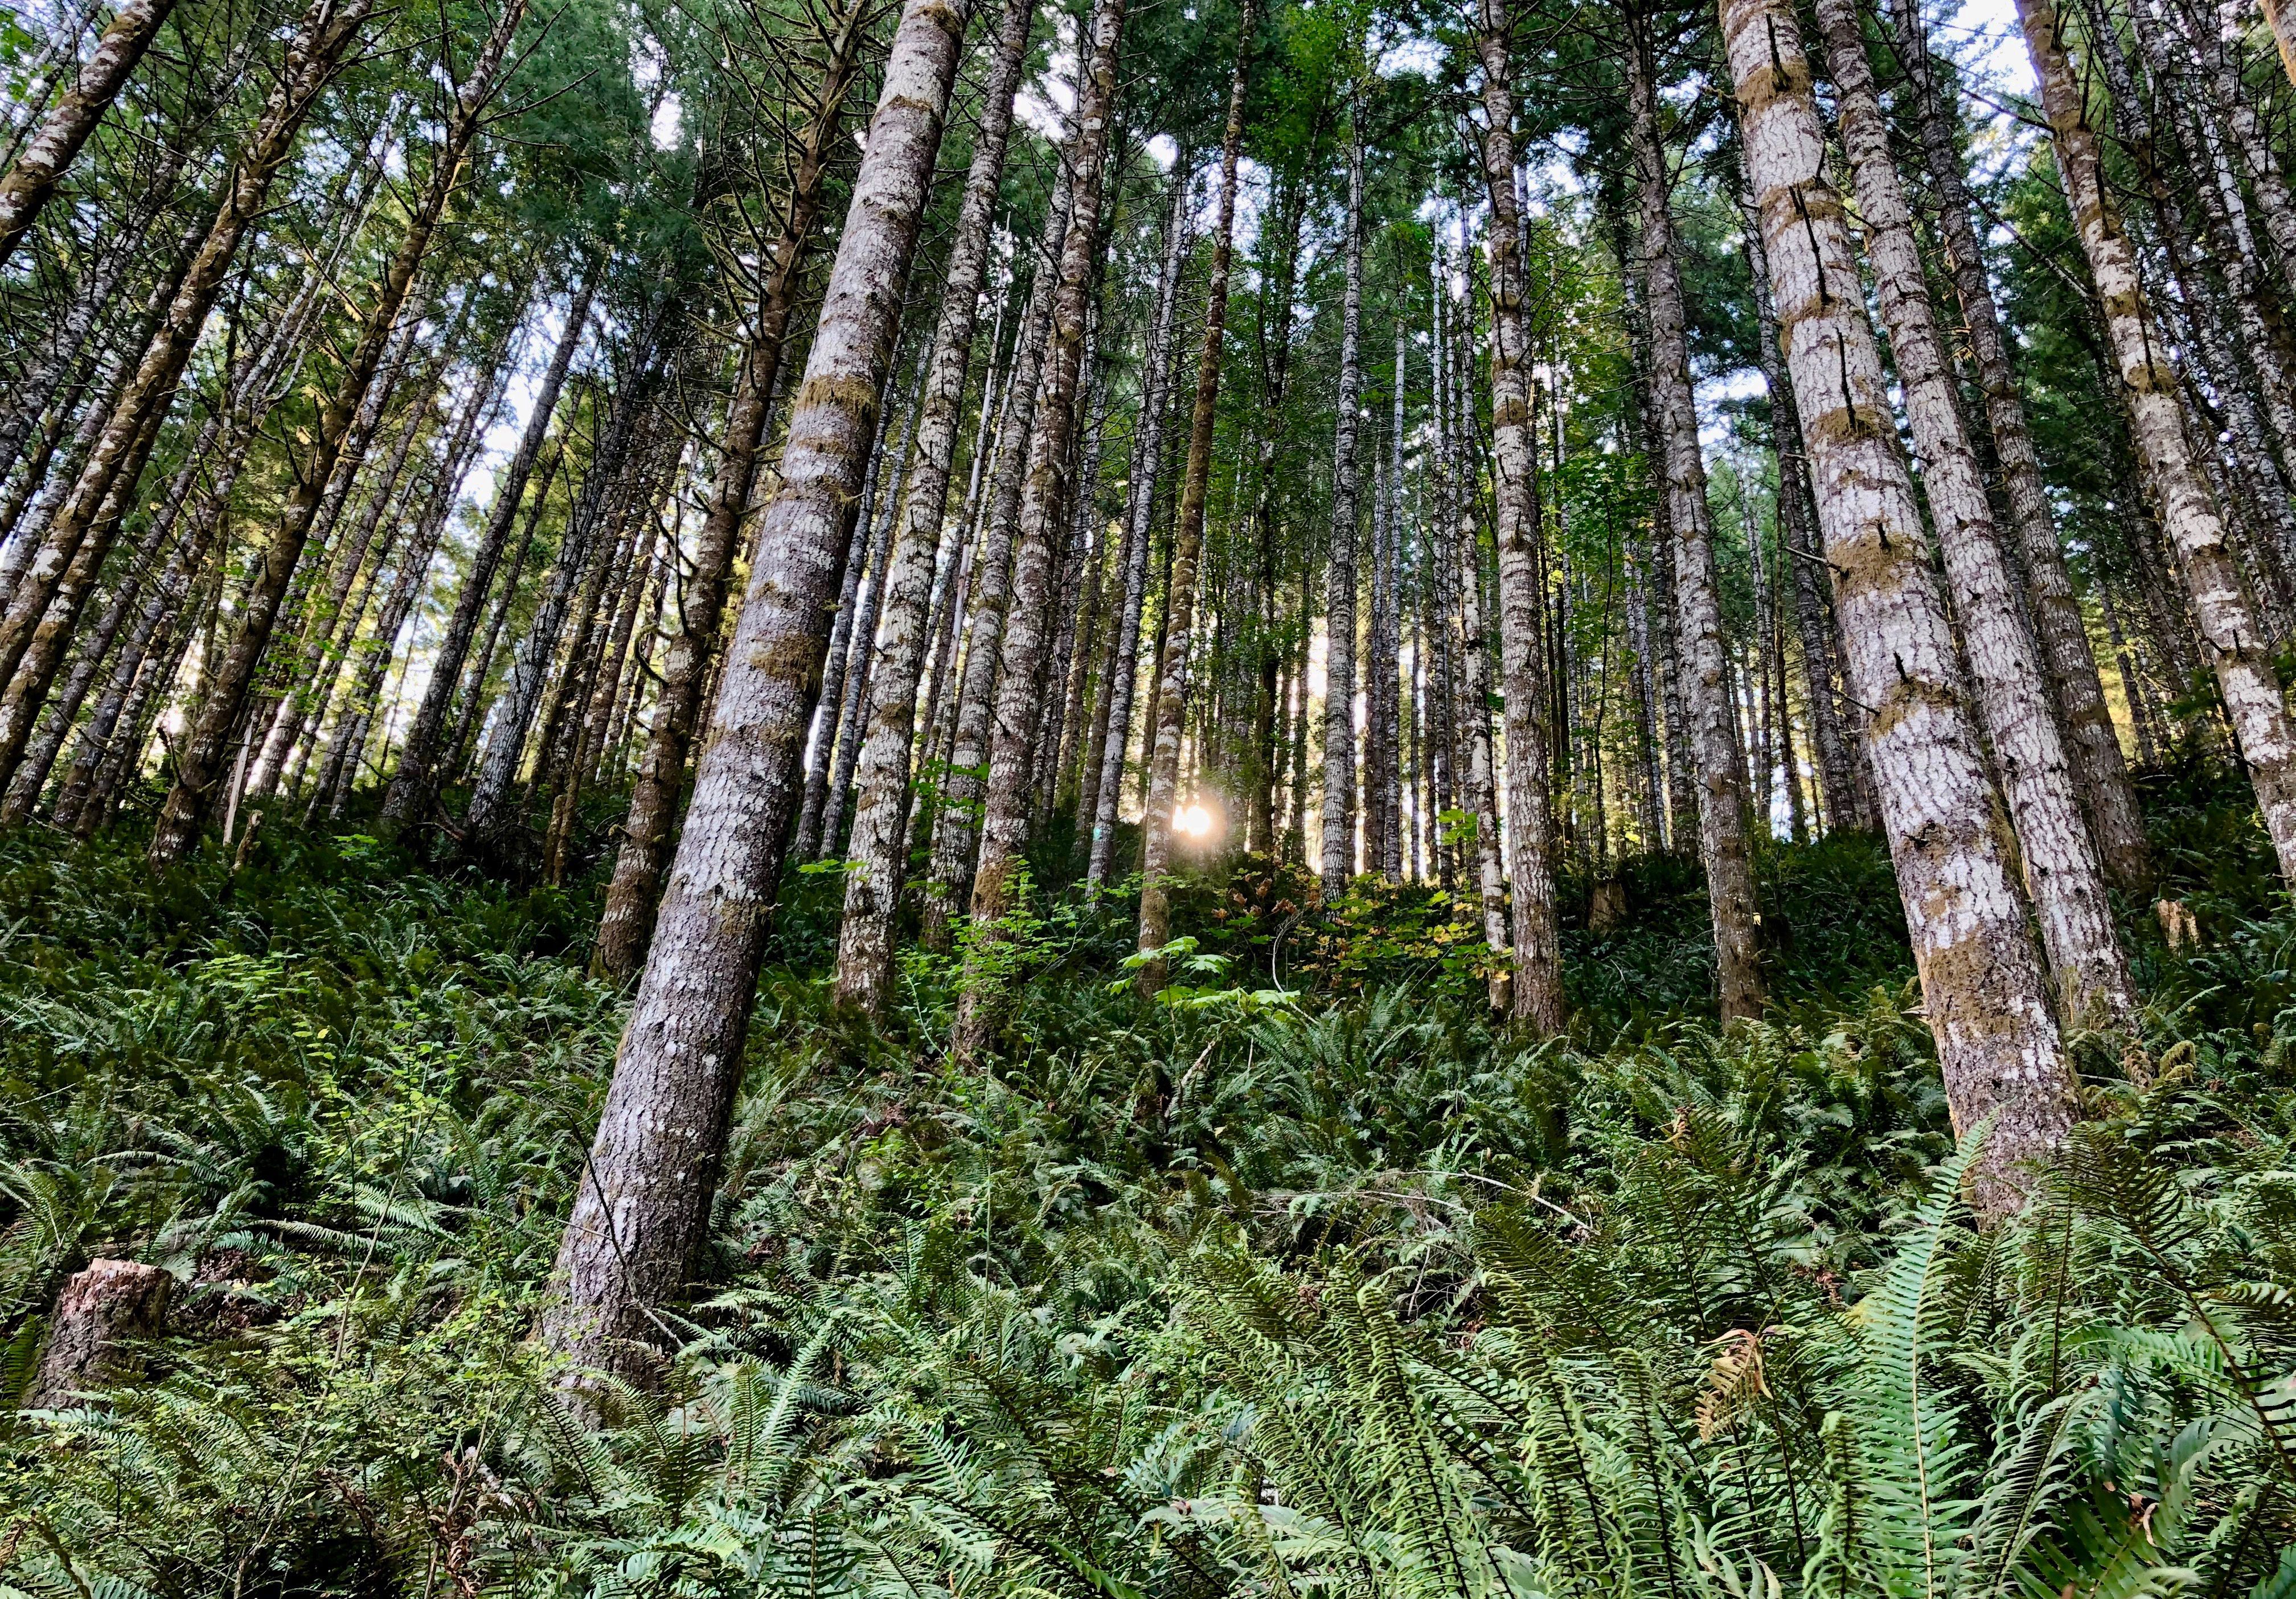 Hiking through the Tillamook Burn: An Oregon forest recovers, decades after  devastating fires 